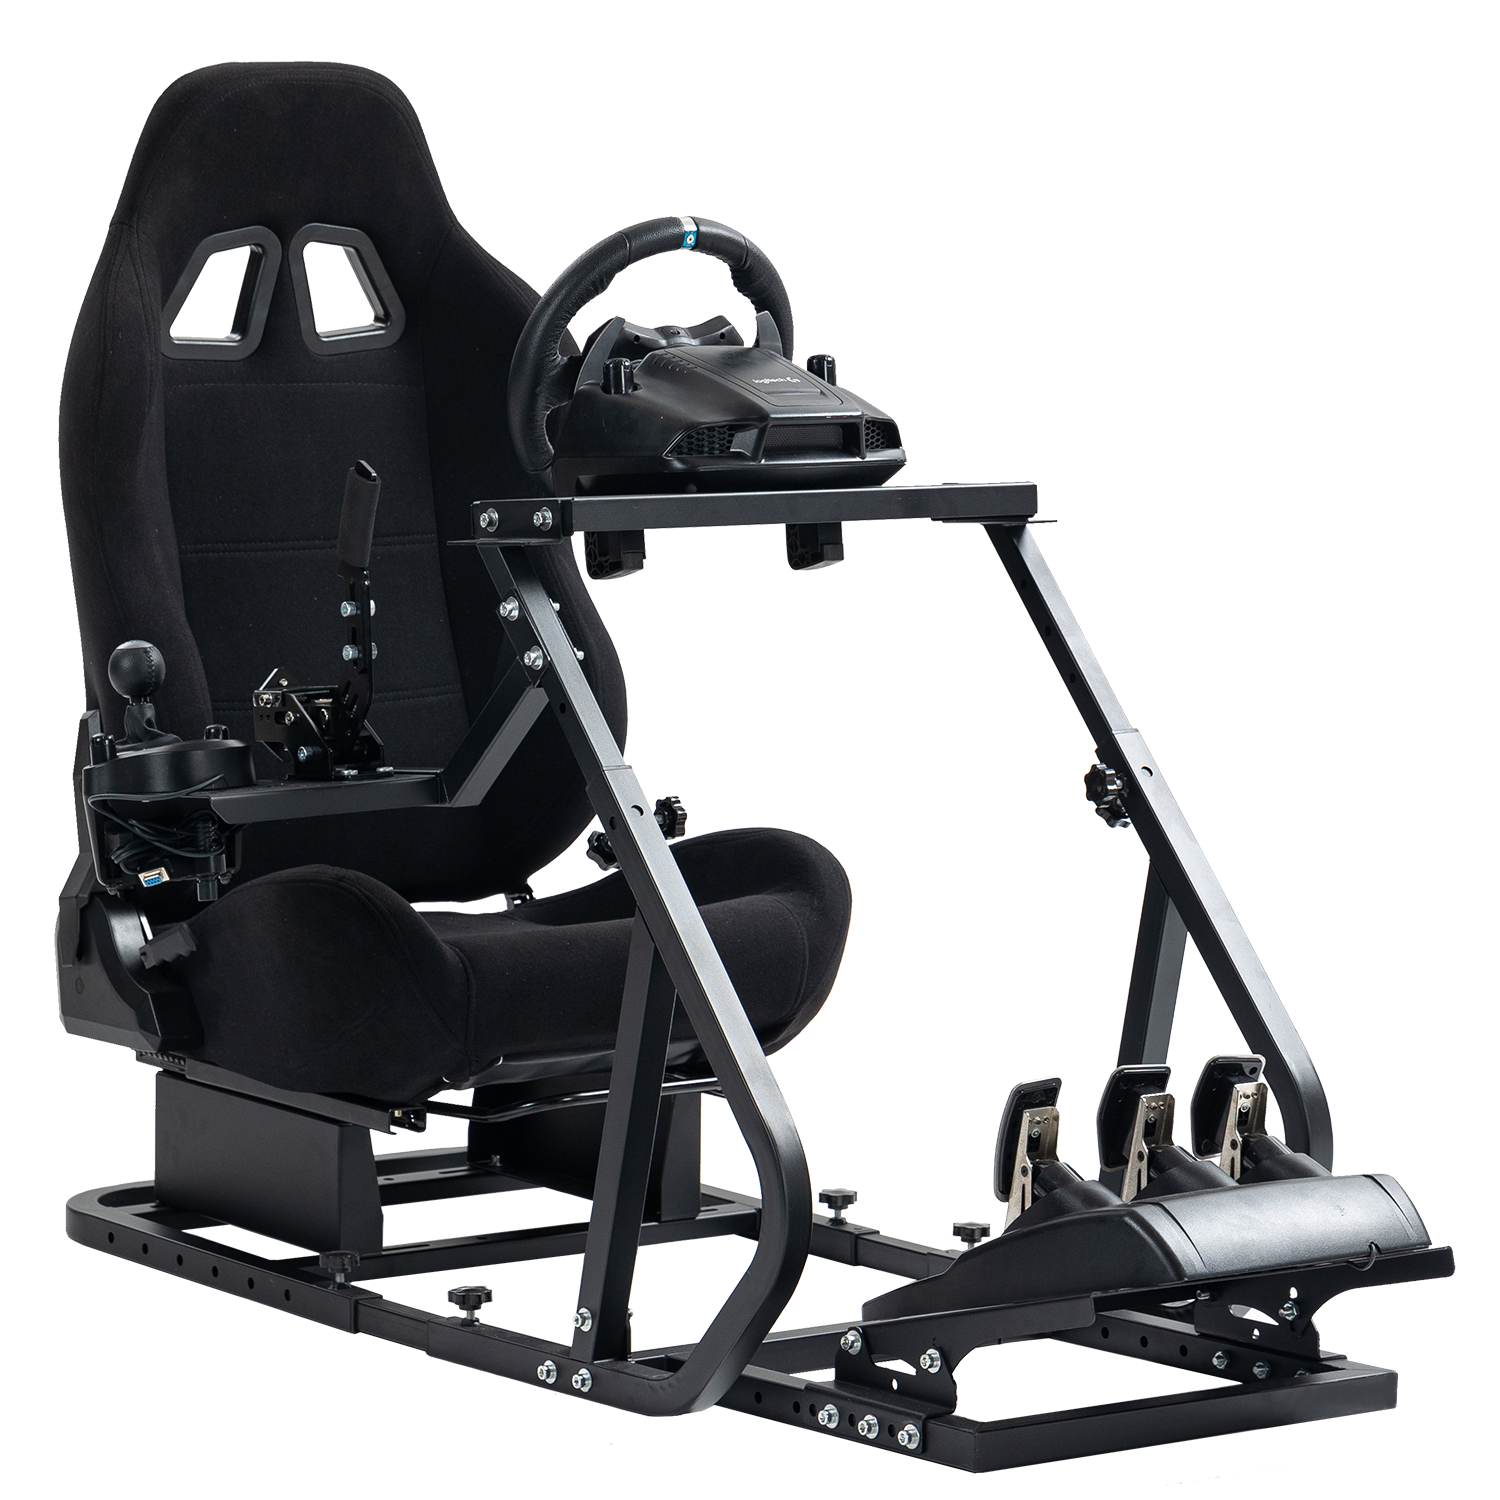 Minneer Driving Simulator Cockpit with Gaming Seat Fit Logitech G29 Thrustmaster